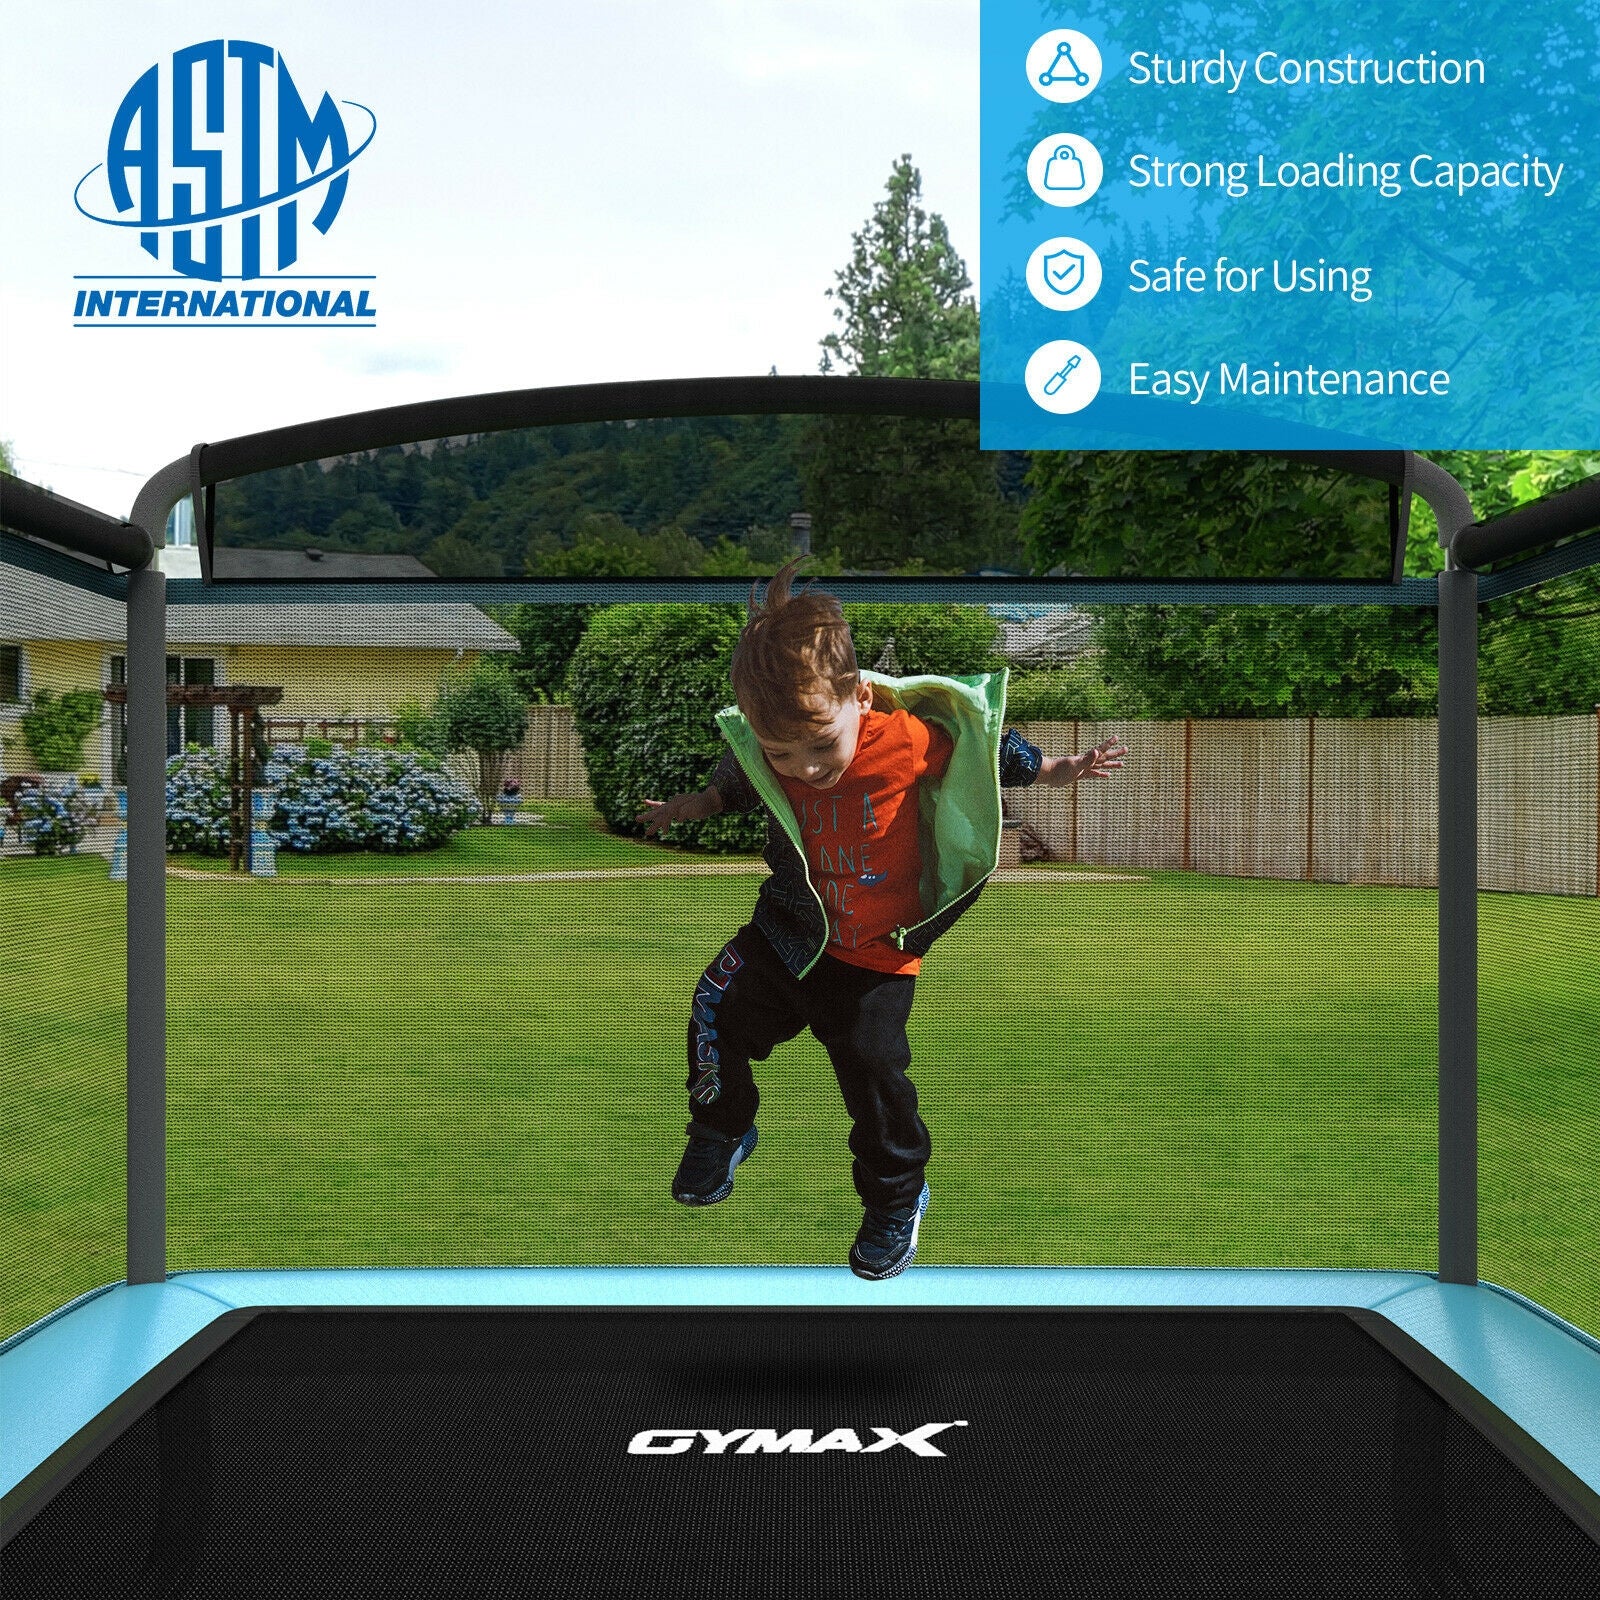 Exceptional Bouncing Experience: Equipped with 40 galvanized springs and a high-density jumping mat, this premium trampoline delivers superior elasticity, ensuring your child enjoys an exhilarating bouncing experience. Jumping not only provides endless fun but also promotes healthy bone growth.